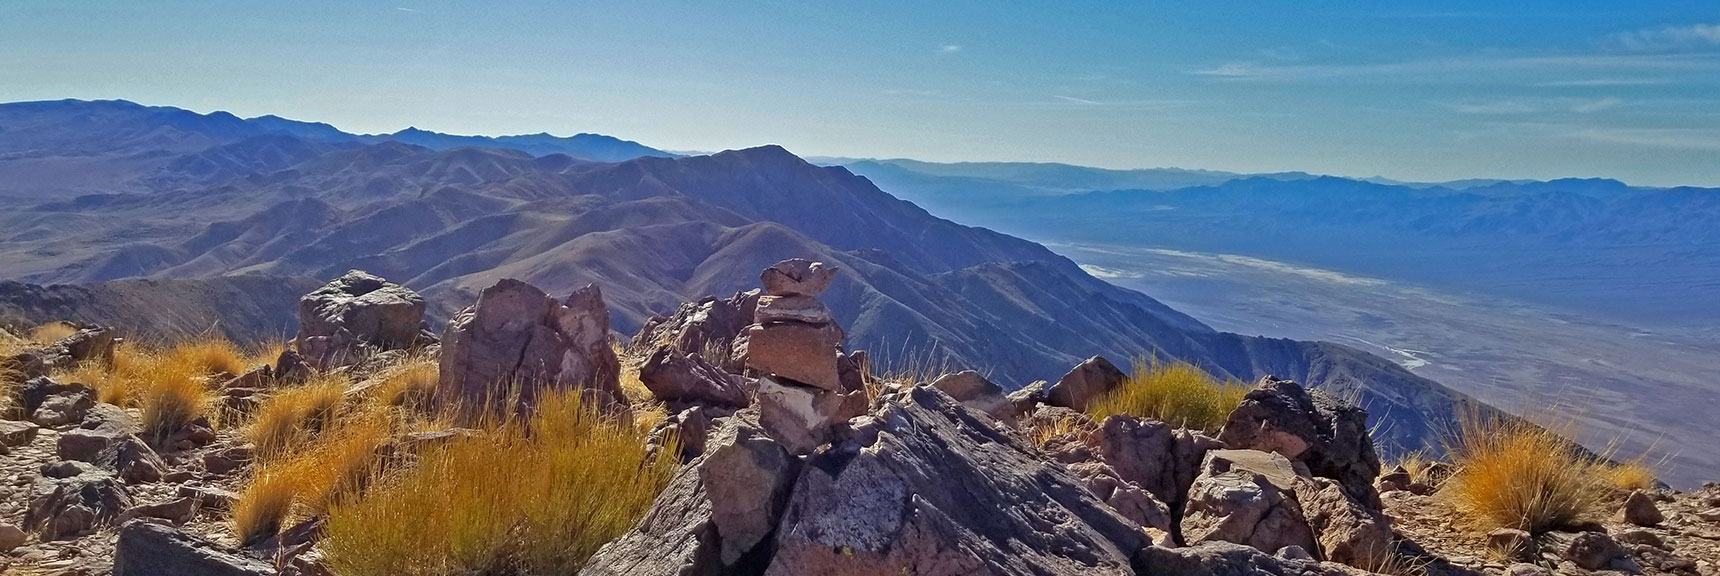 Southwestern View from Mt. Perry Summit | Dante's View to Mt. Perry | Death Valley National Park, CA